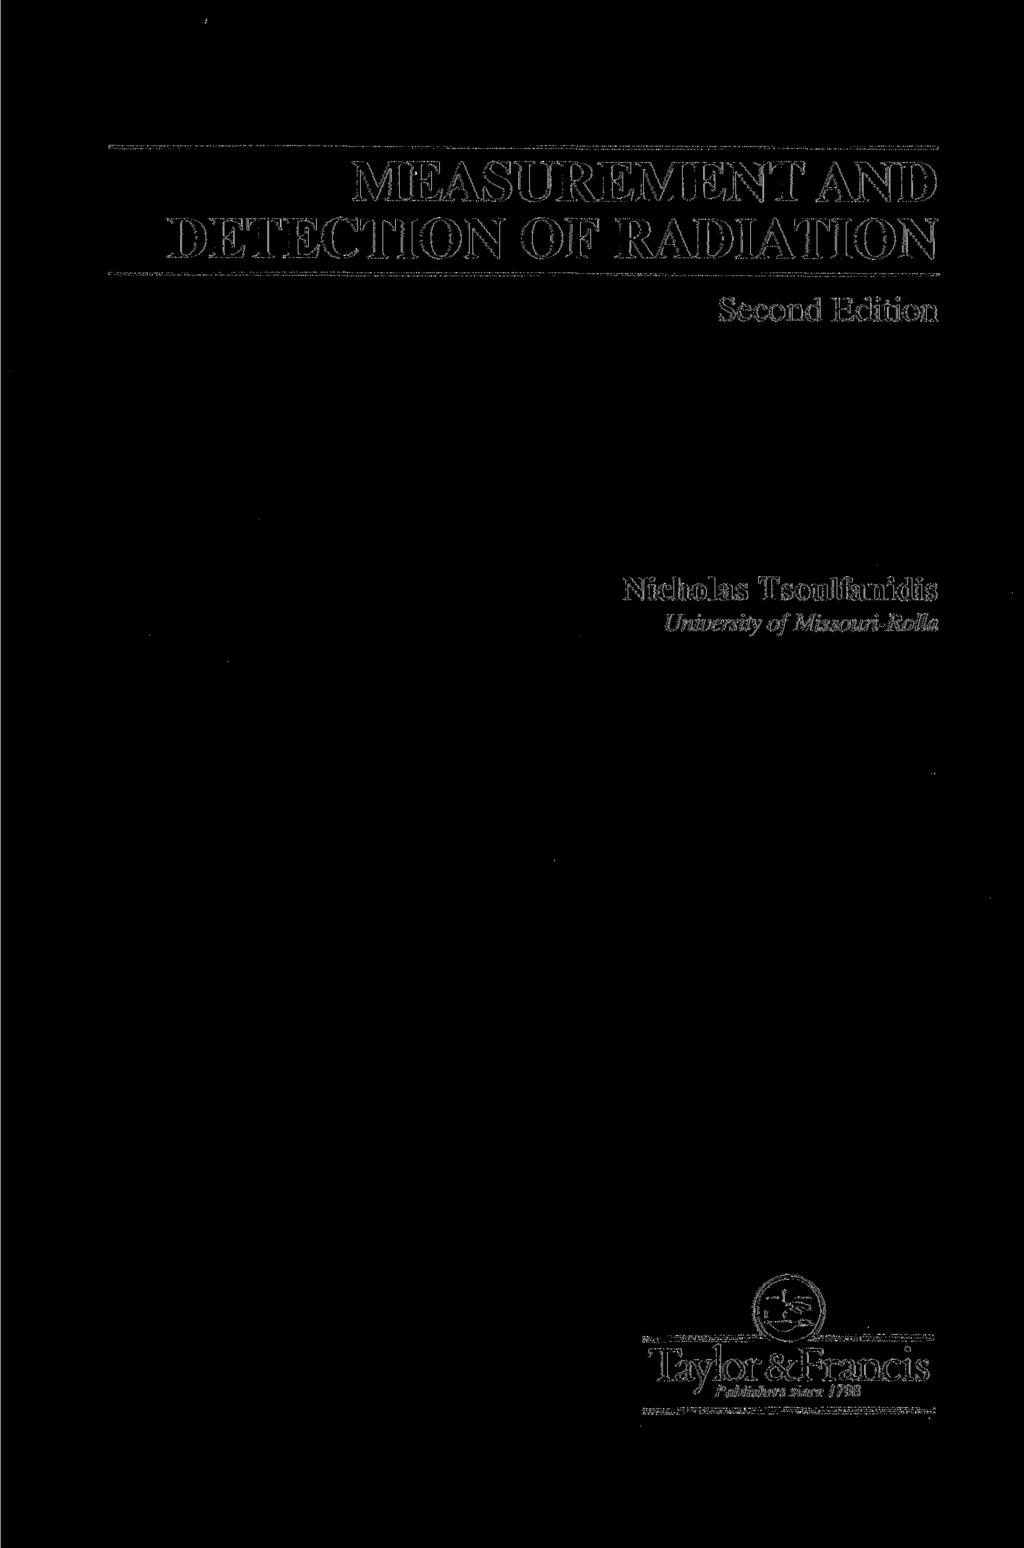 MEASUREMENT AND DETECTION OF RADIATION Second Edition Nicholas